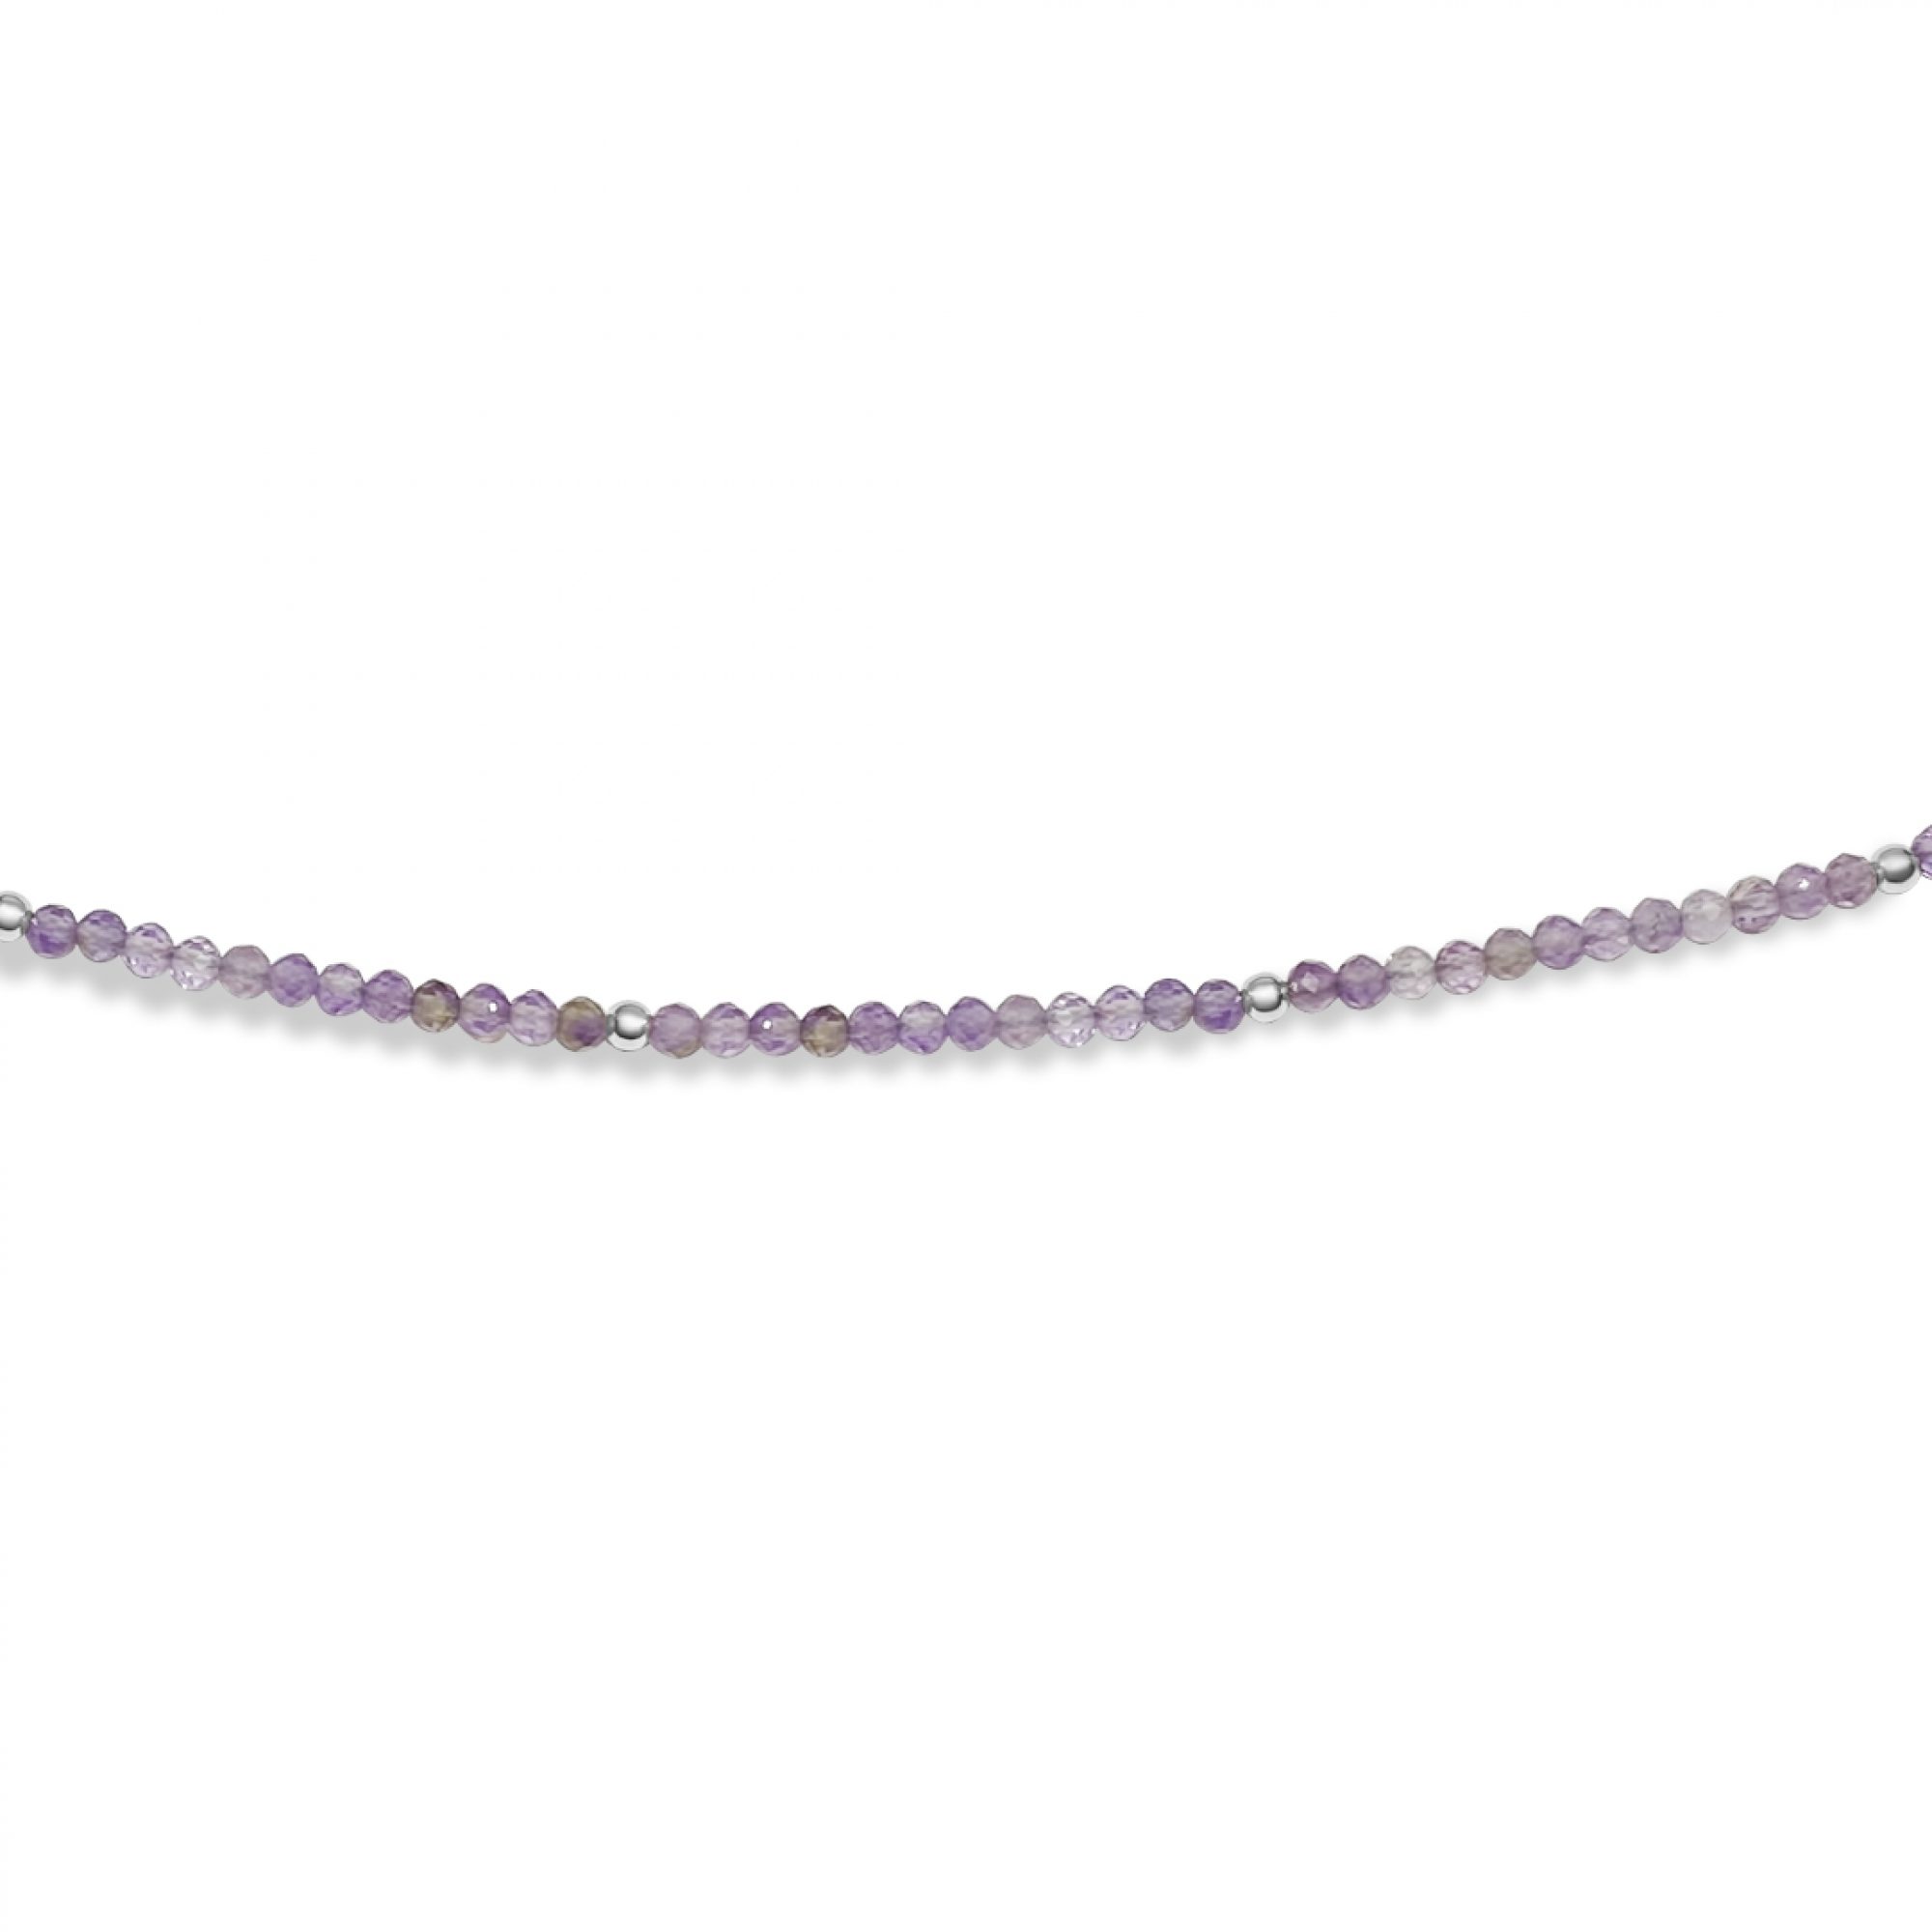 Anklet with amethyst beads